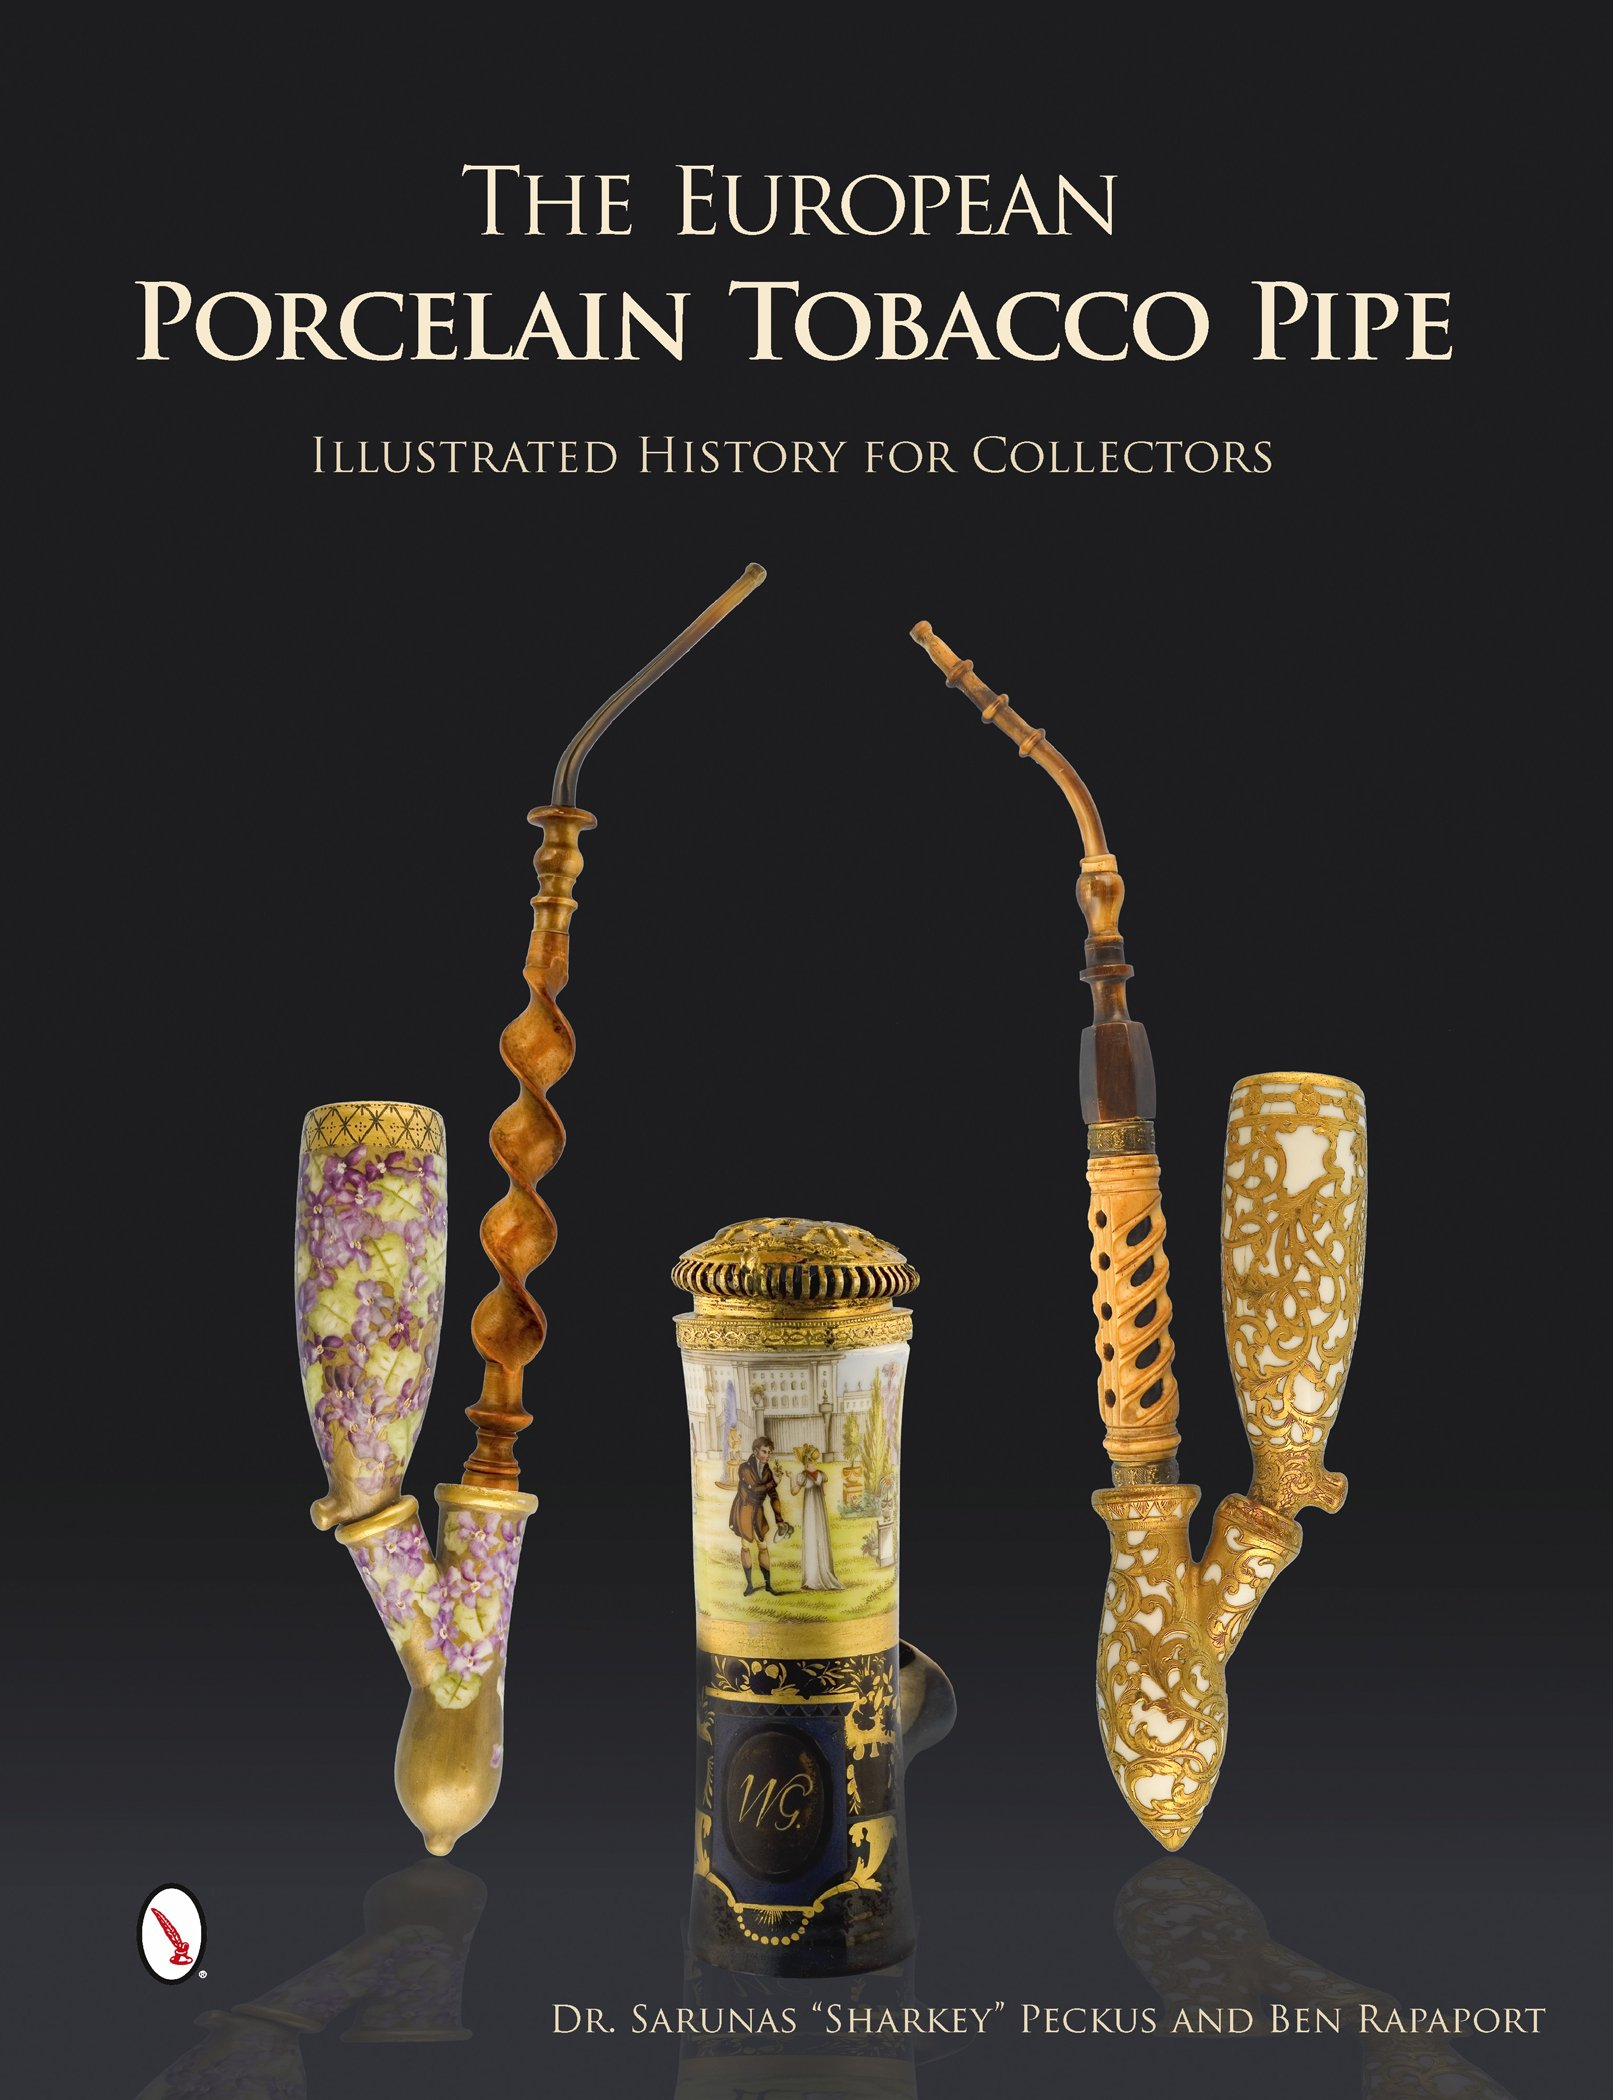 The European Porcelain Tobacco Pipe: Illustrated History for Collectors (英语) 精装 – 2014年10月28日 by Sarunas Peckus (作者), Benjamin Rapaport